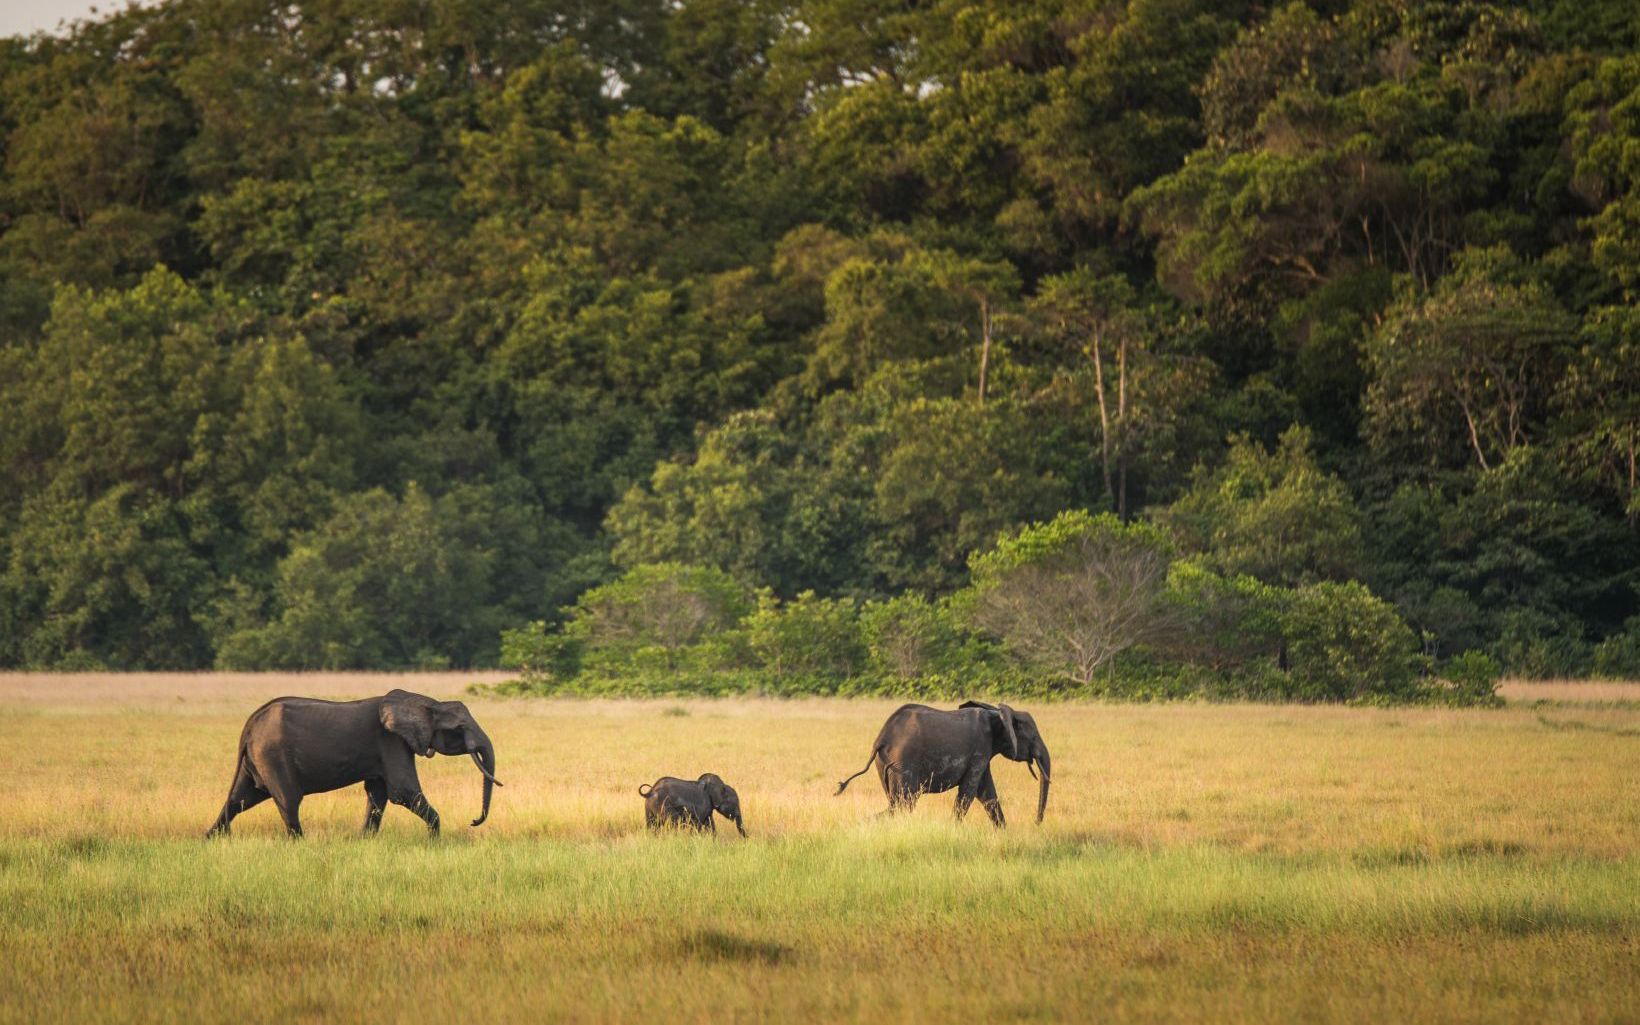 Forest elephants sighting in Loango National Park.